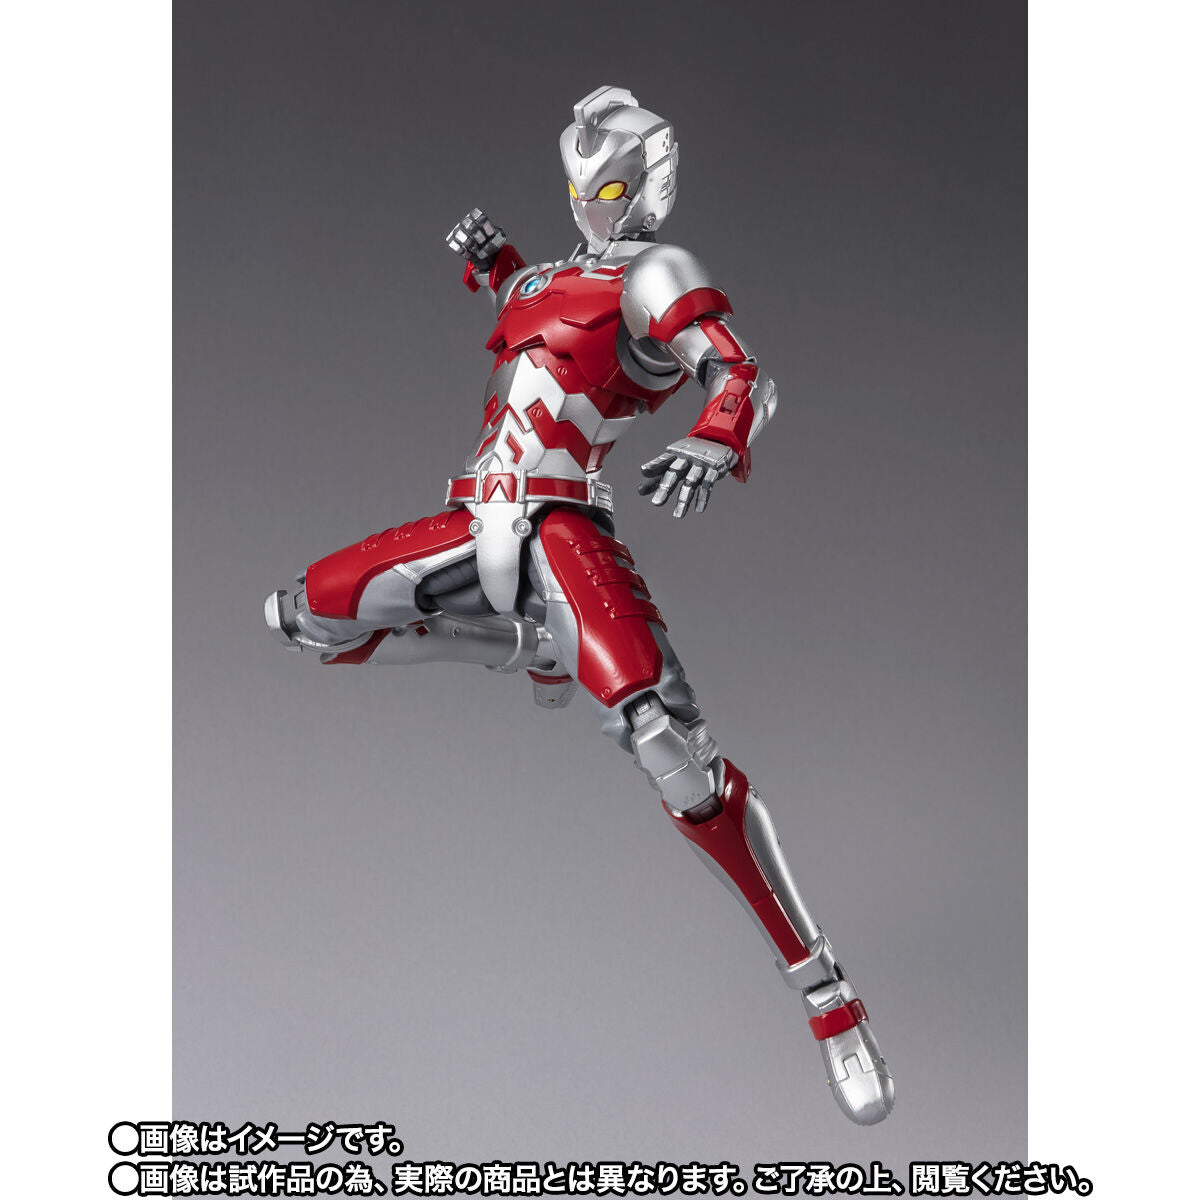 [PREORDER] SH Figuarts Ultraman Suit Ace -The Animation-